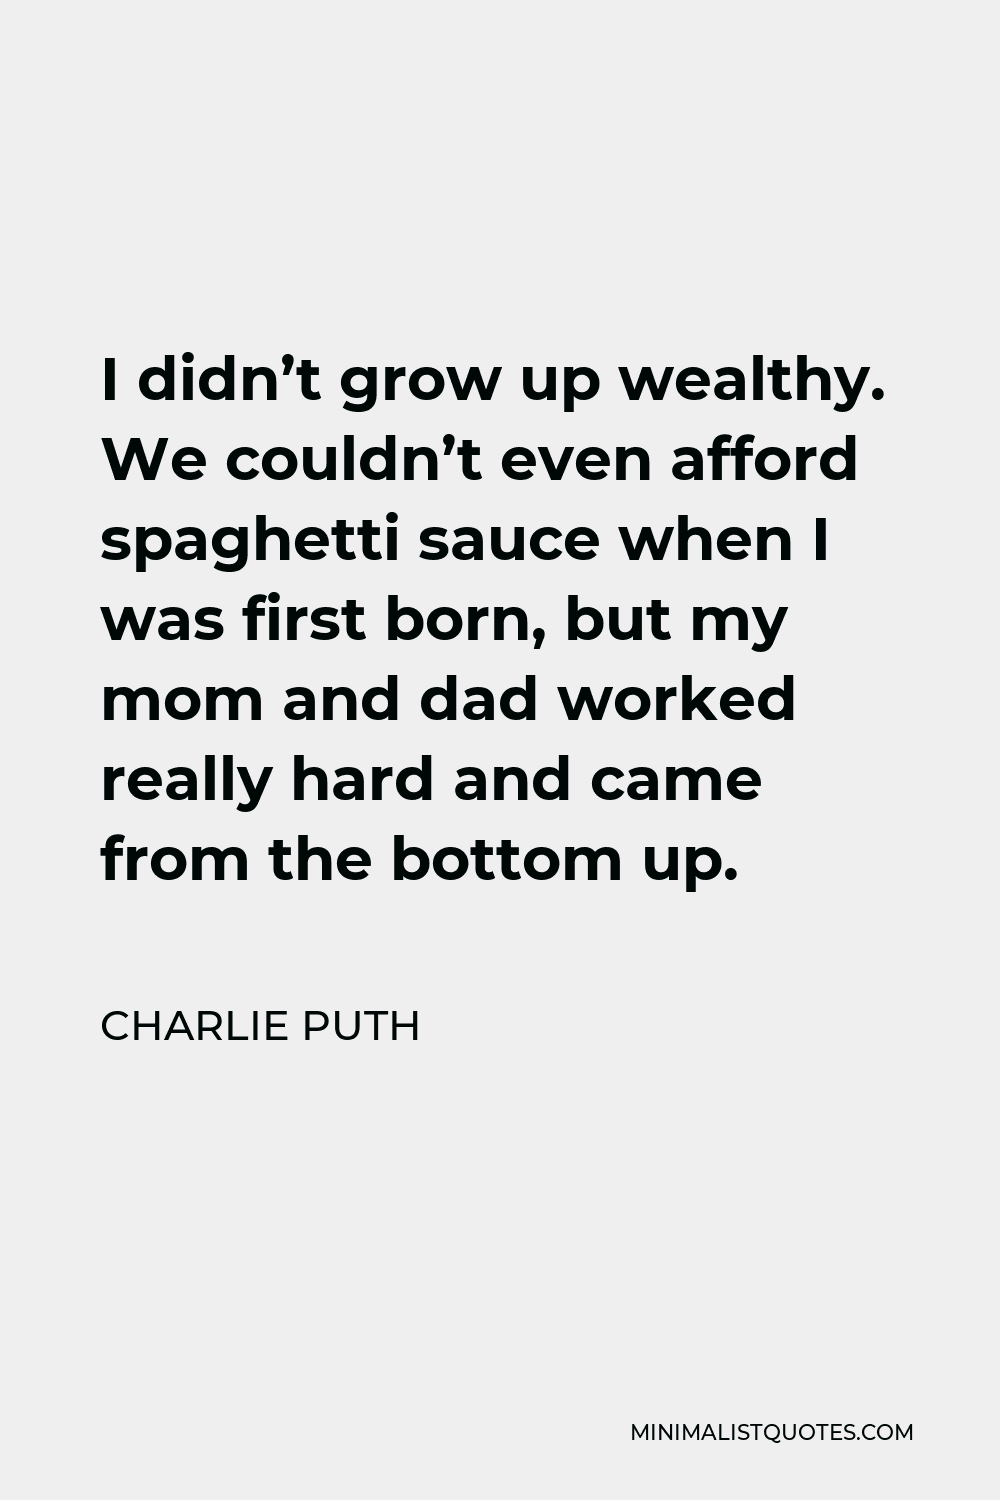 Charlie Puth Quote - I didn’t grow up wealthy. We couldn’t even afford spaghetti sauce when I was first born, but my mom and dad worked really hard and came from the bottom up.